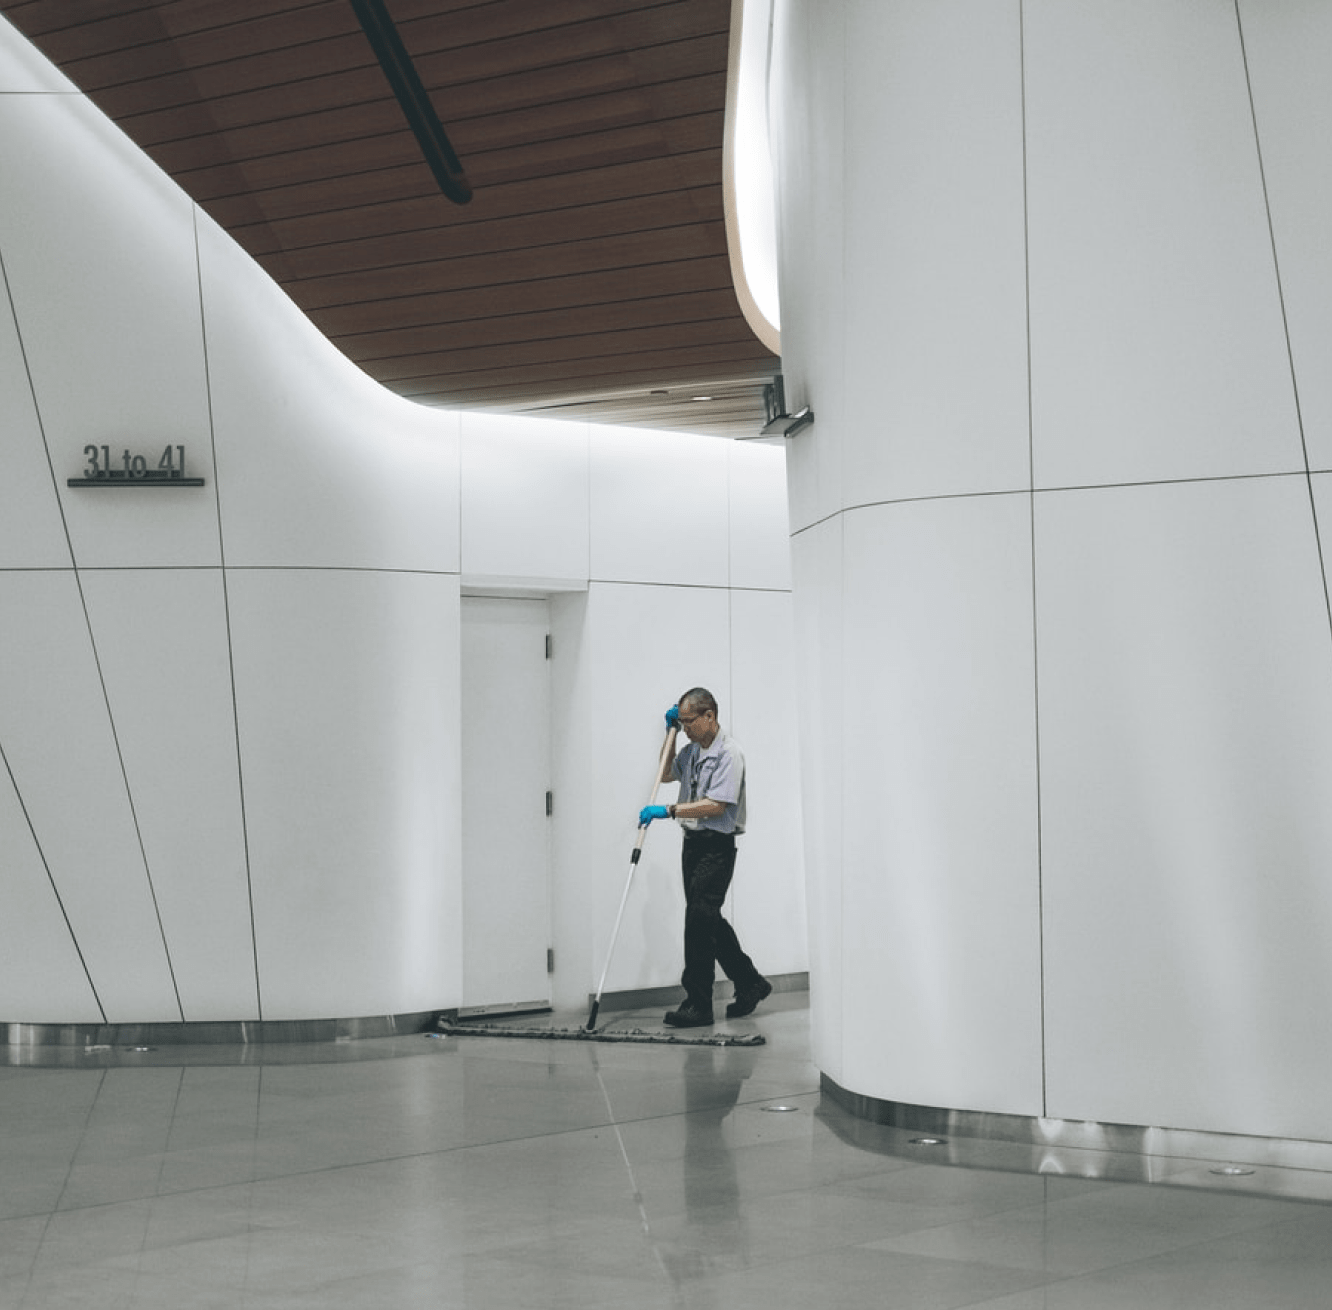 A cleaning supplier working in the lobby area of a building